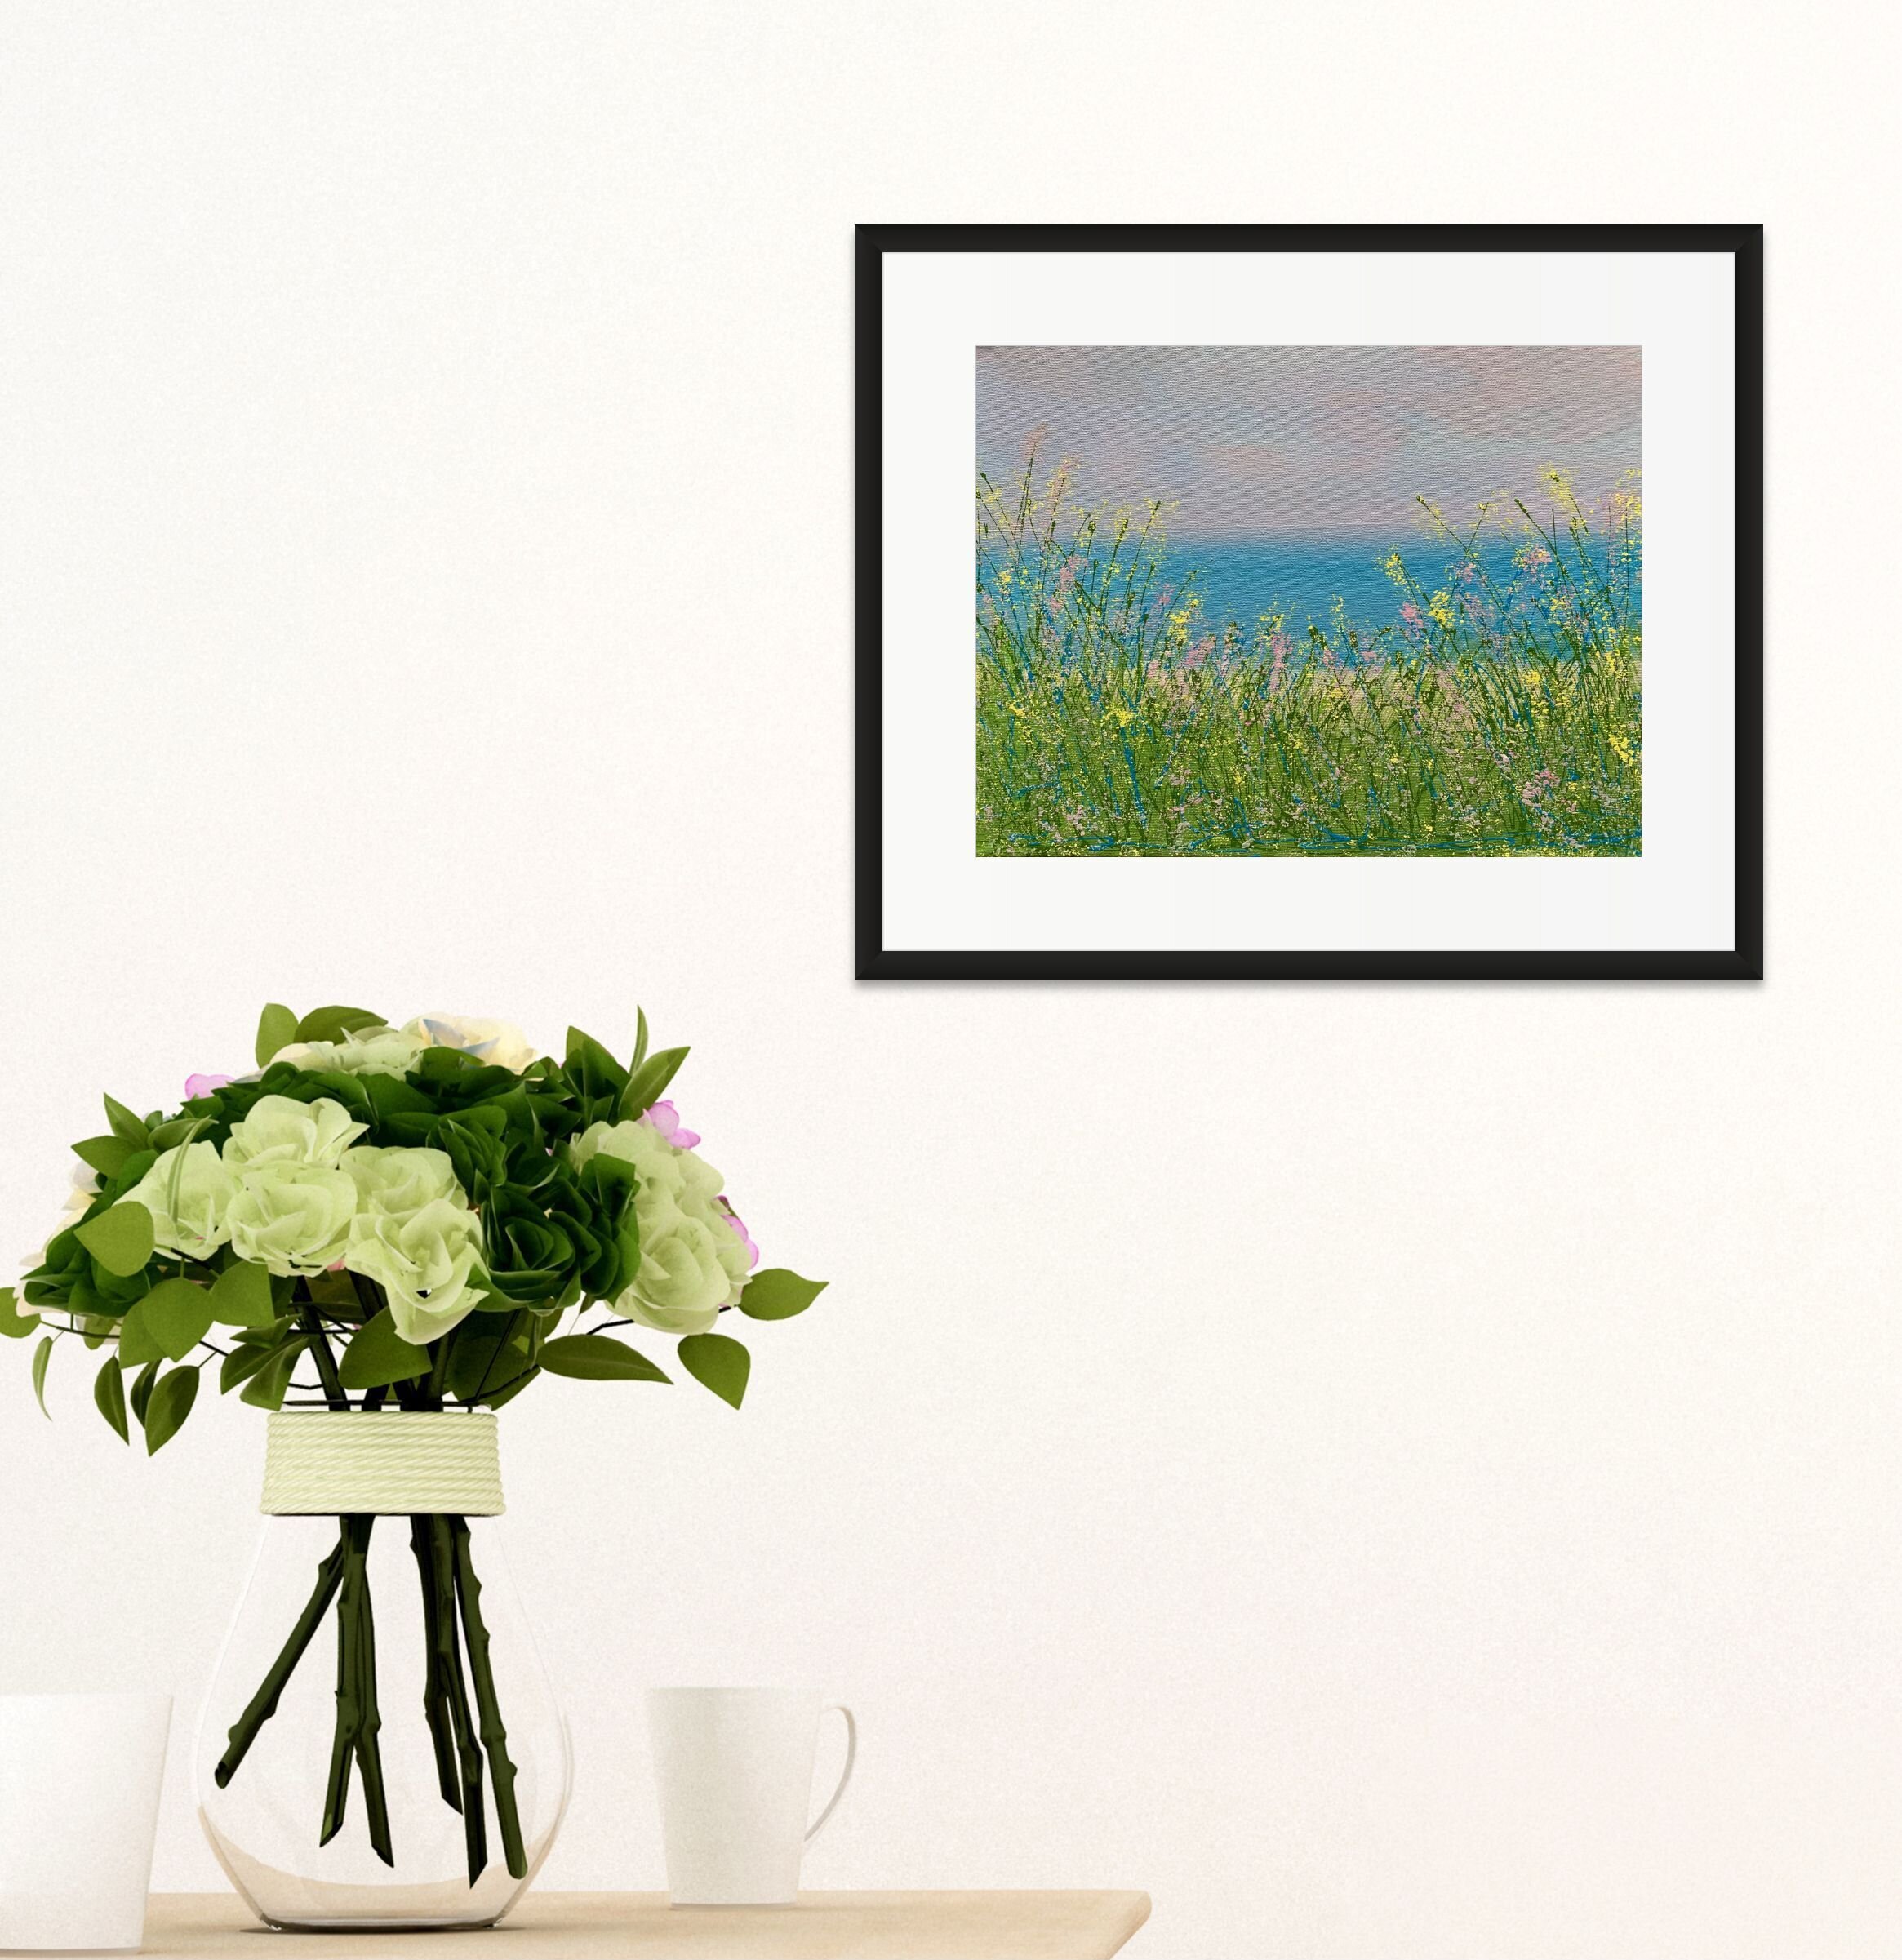 floral lakeside painting next to clear vase with white flowers.jpg